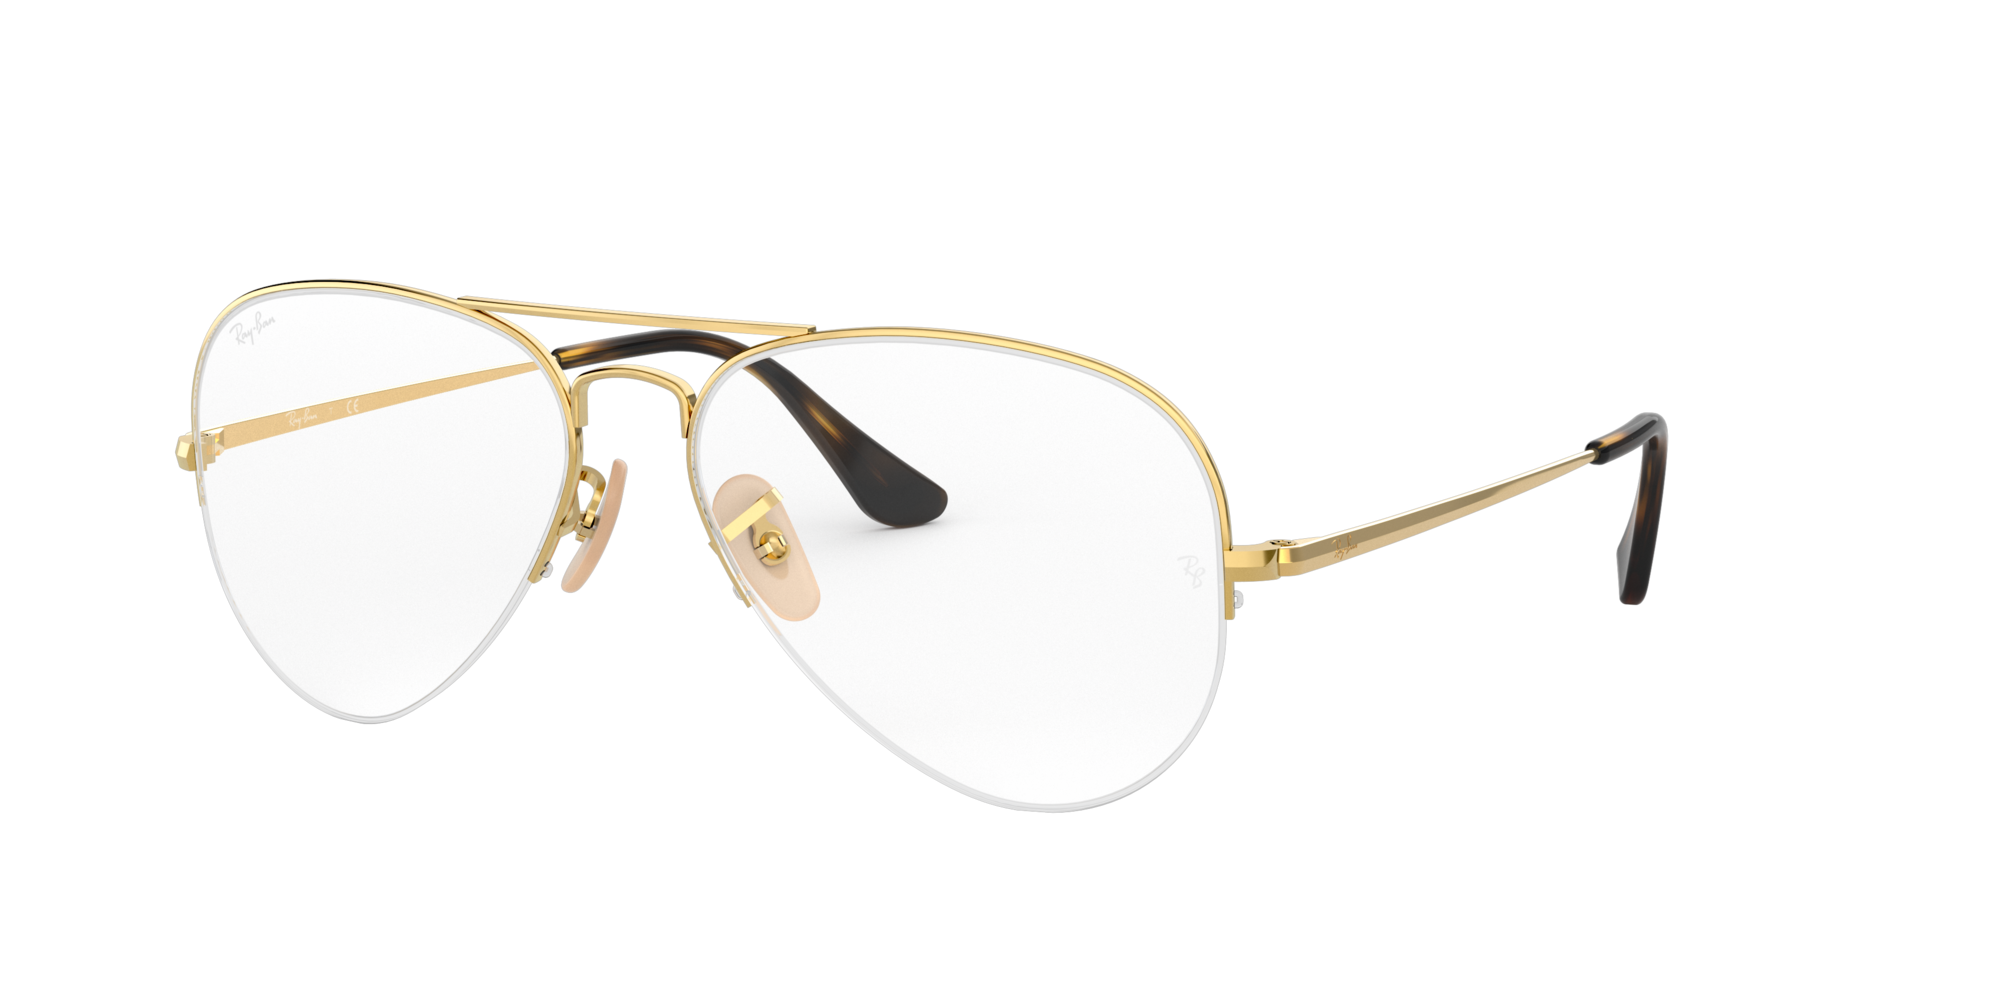 Ray-Ban 0RX6589 in Gold Glasses | OPSM